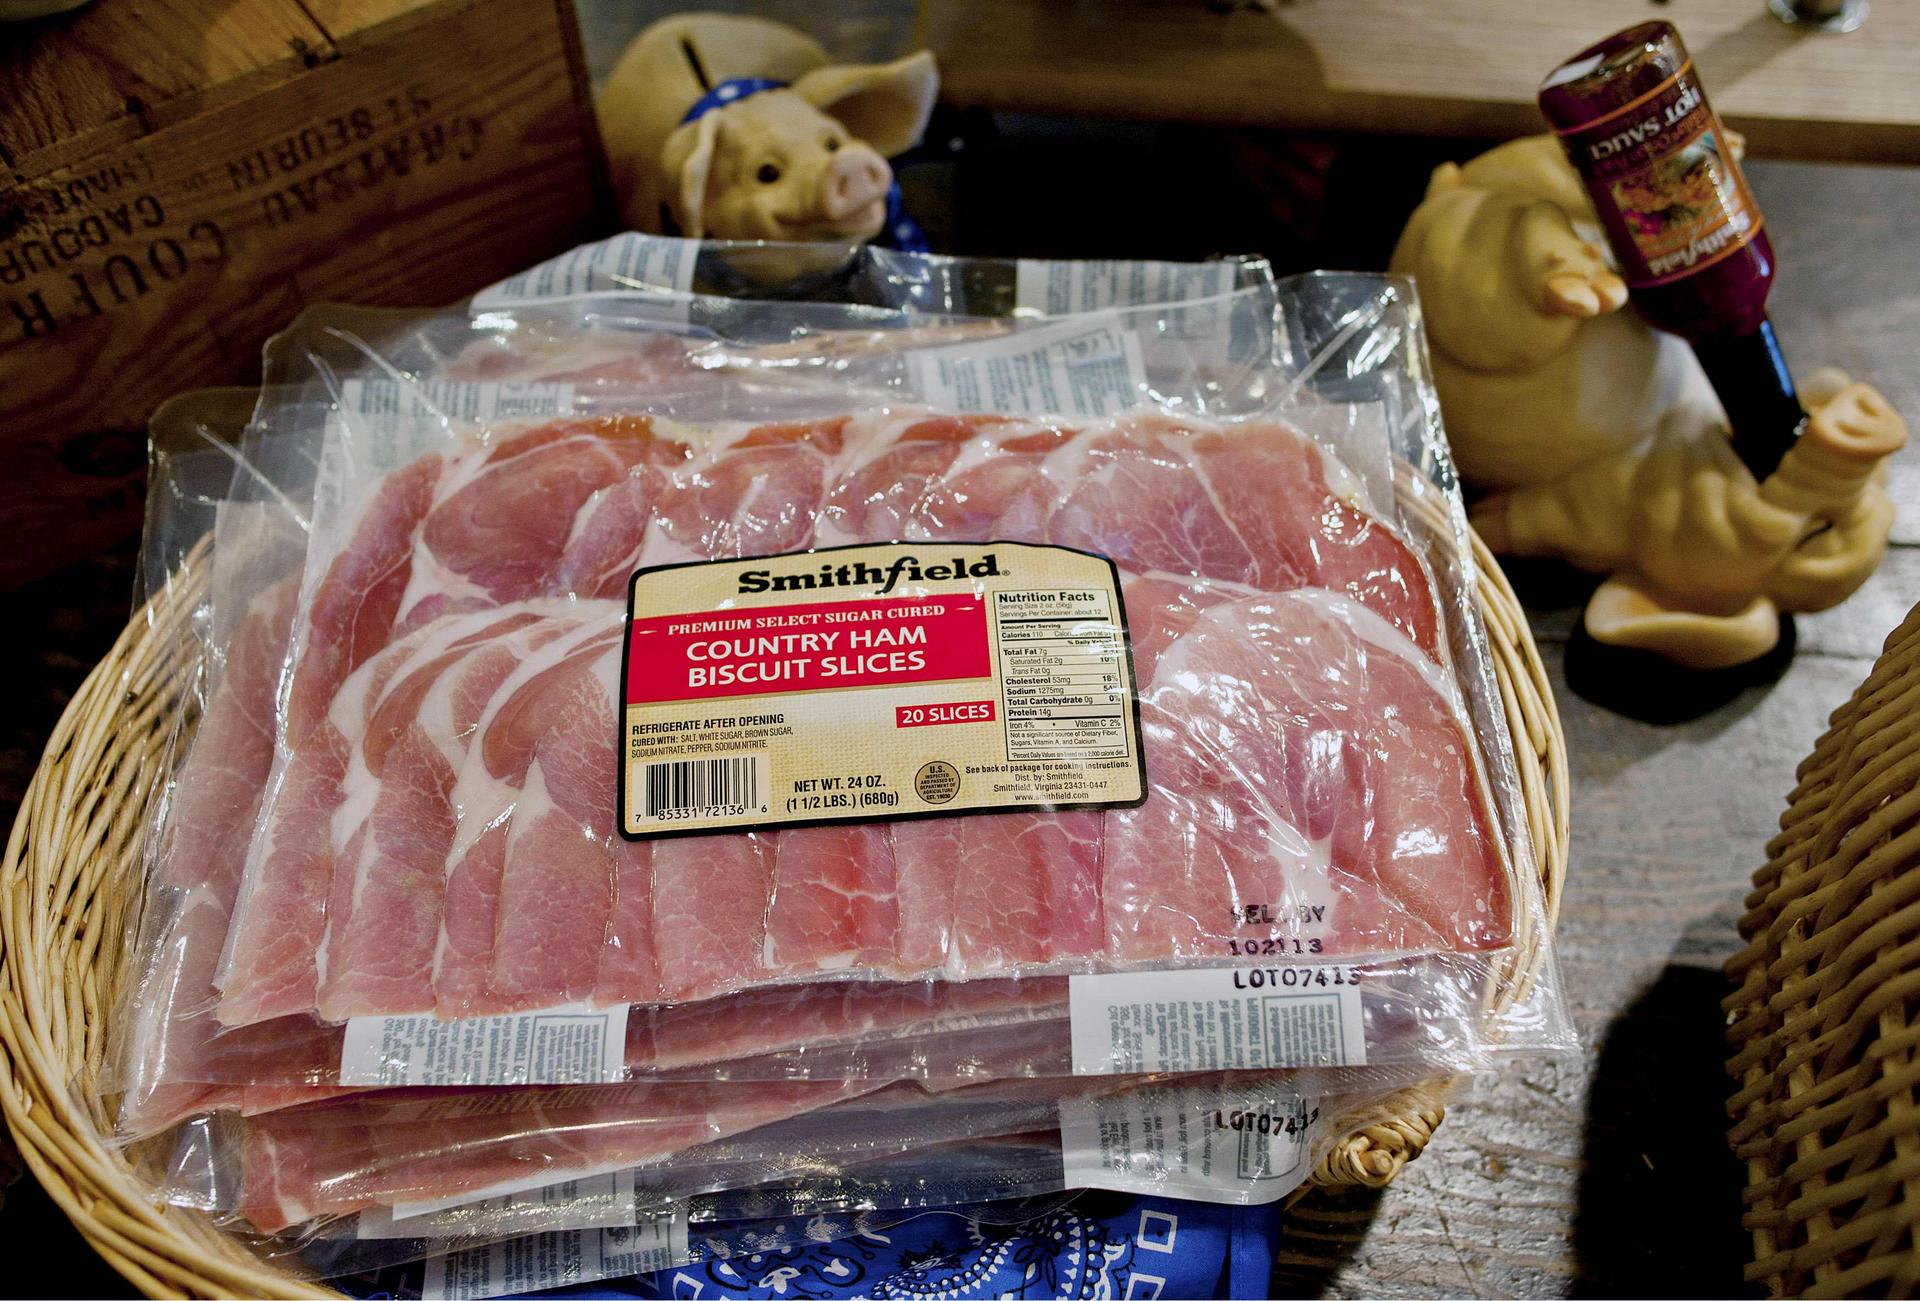 Smithfield is the dominant player in the US pork market.